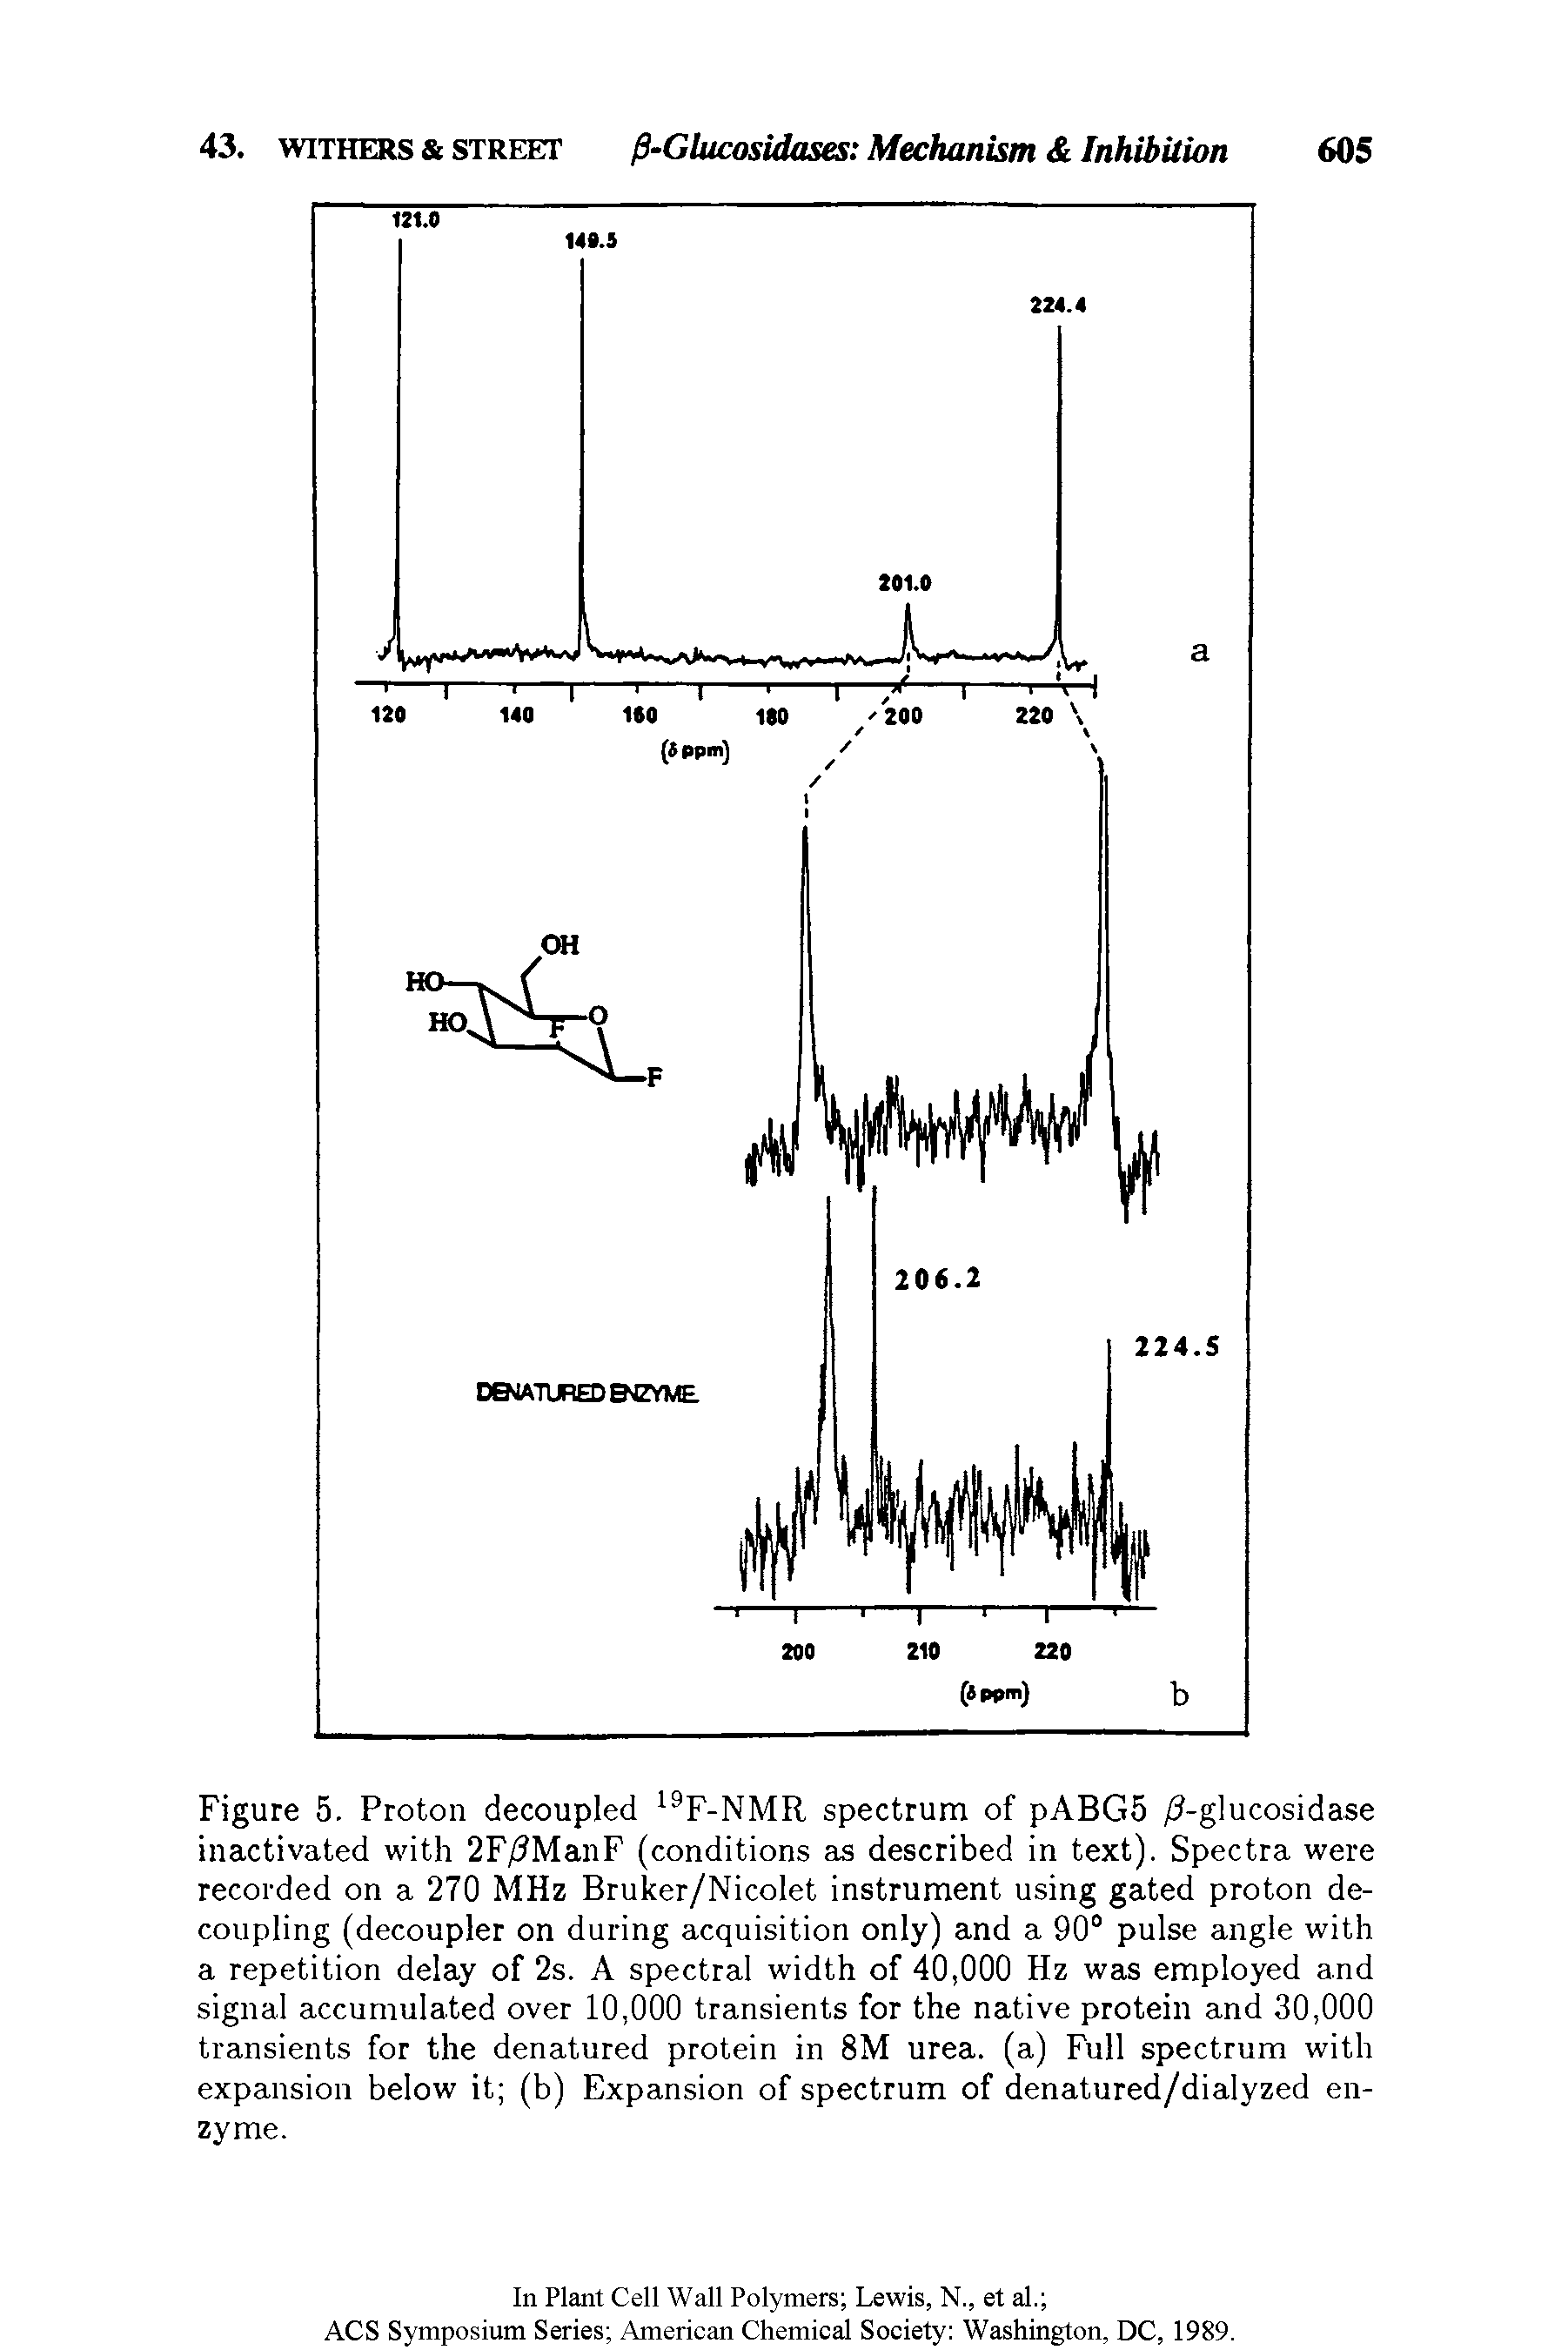 Figure 5. Proton decoupled 19F-NMR spectrum of pABG5 / -glucosidase inactivated with 2F/ ManF (conditions as described in text). Spectra were recorded on a 270 MHz Bruker/Nicolet instrument using gated proton decoupling (decoupler on during acquisition only) and a 90° pulse angle with a repetition delay of 2s. A spectral width of 40,000 Hz was employed and signal accumulated over 10,000 transients for the native protein and 30,000 transients for the denatured protein in 8M urea, (a) Full spectrum with expansion below it (b) Expansion of spectrum of denatured/dialyzed enzyme.